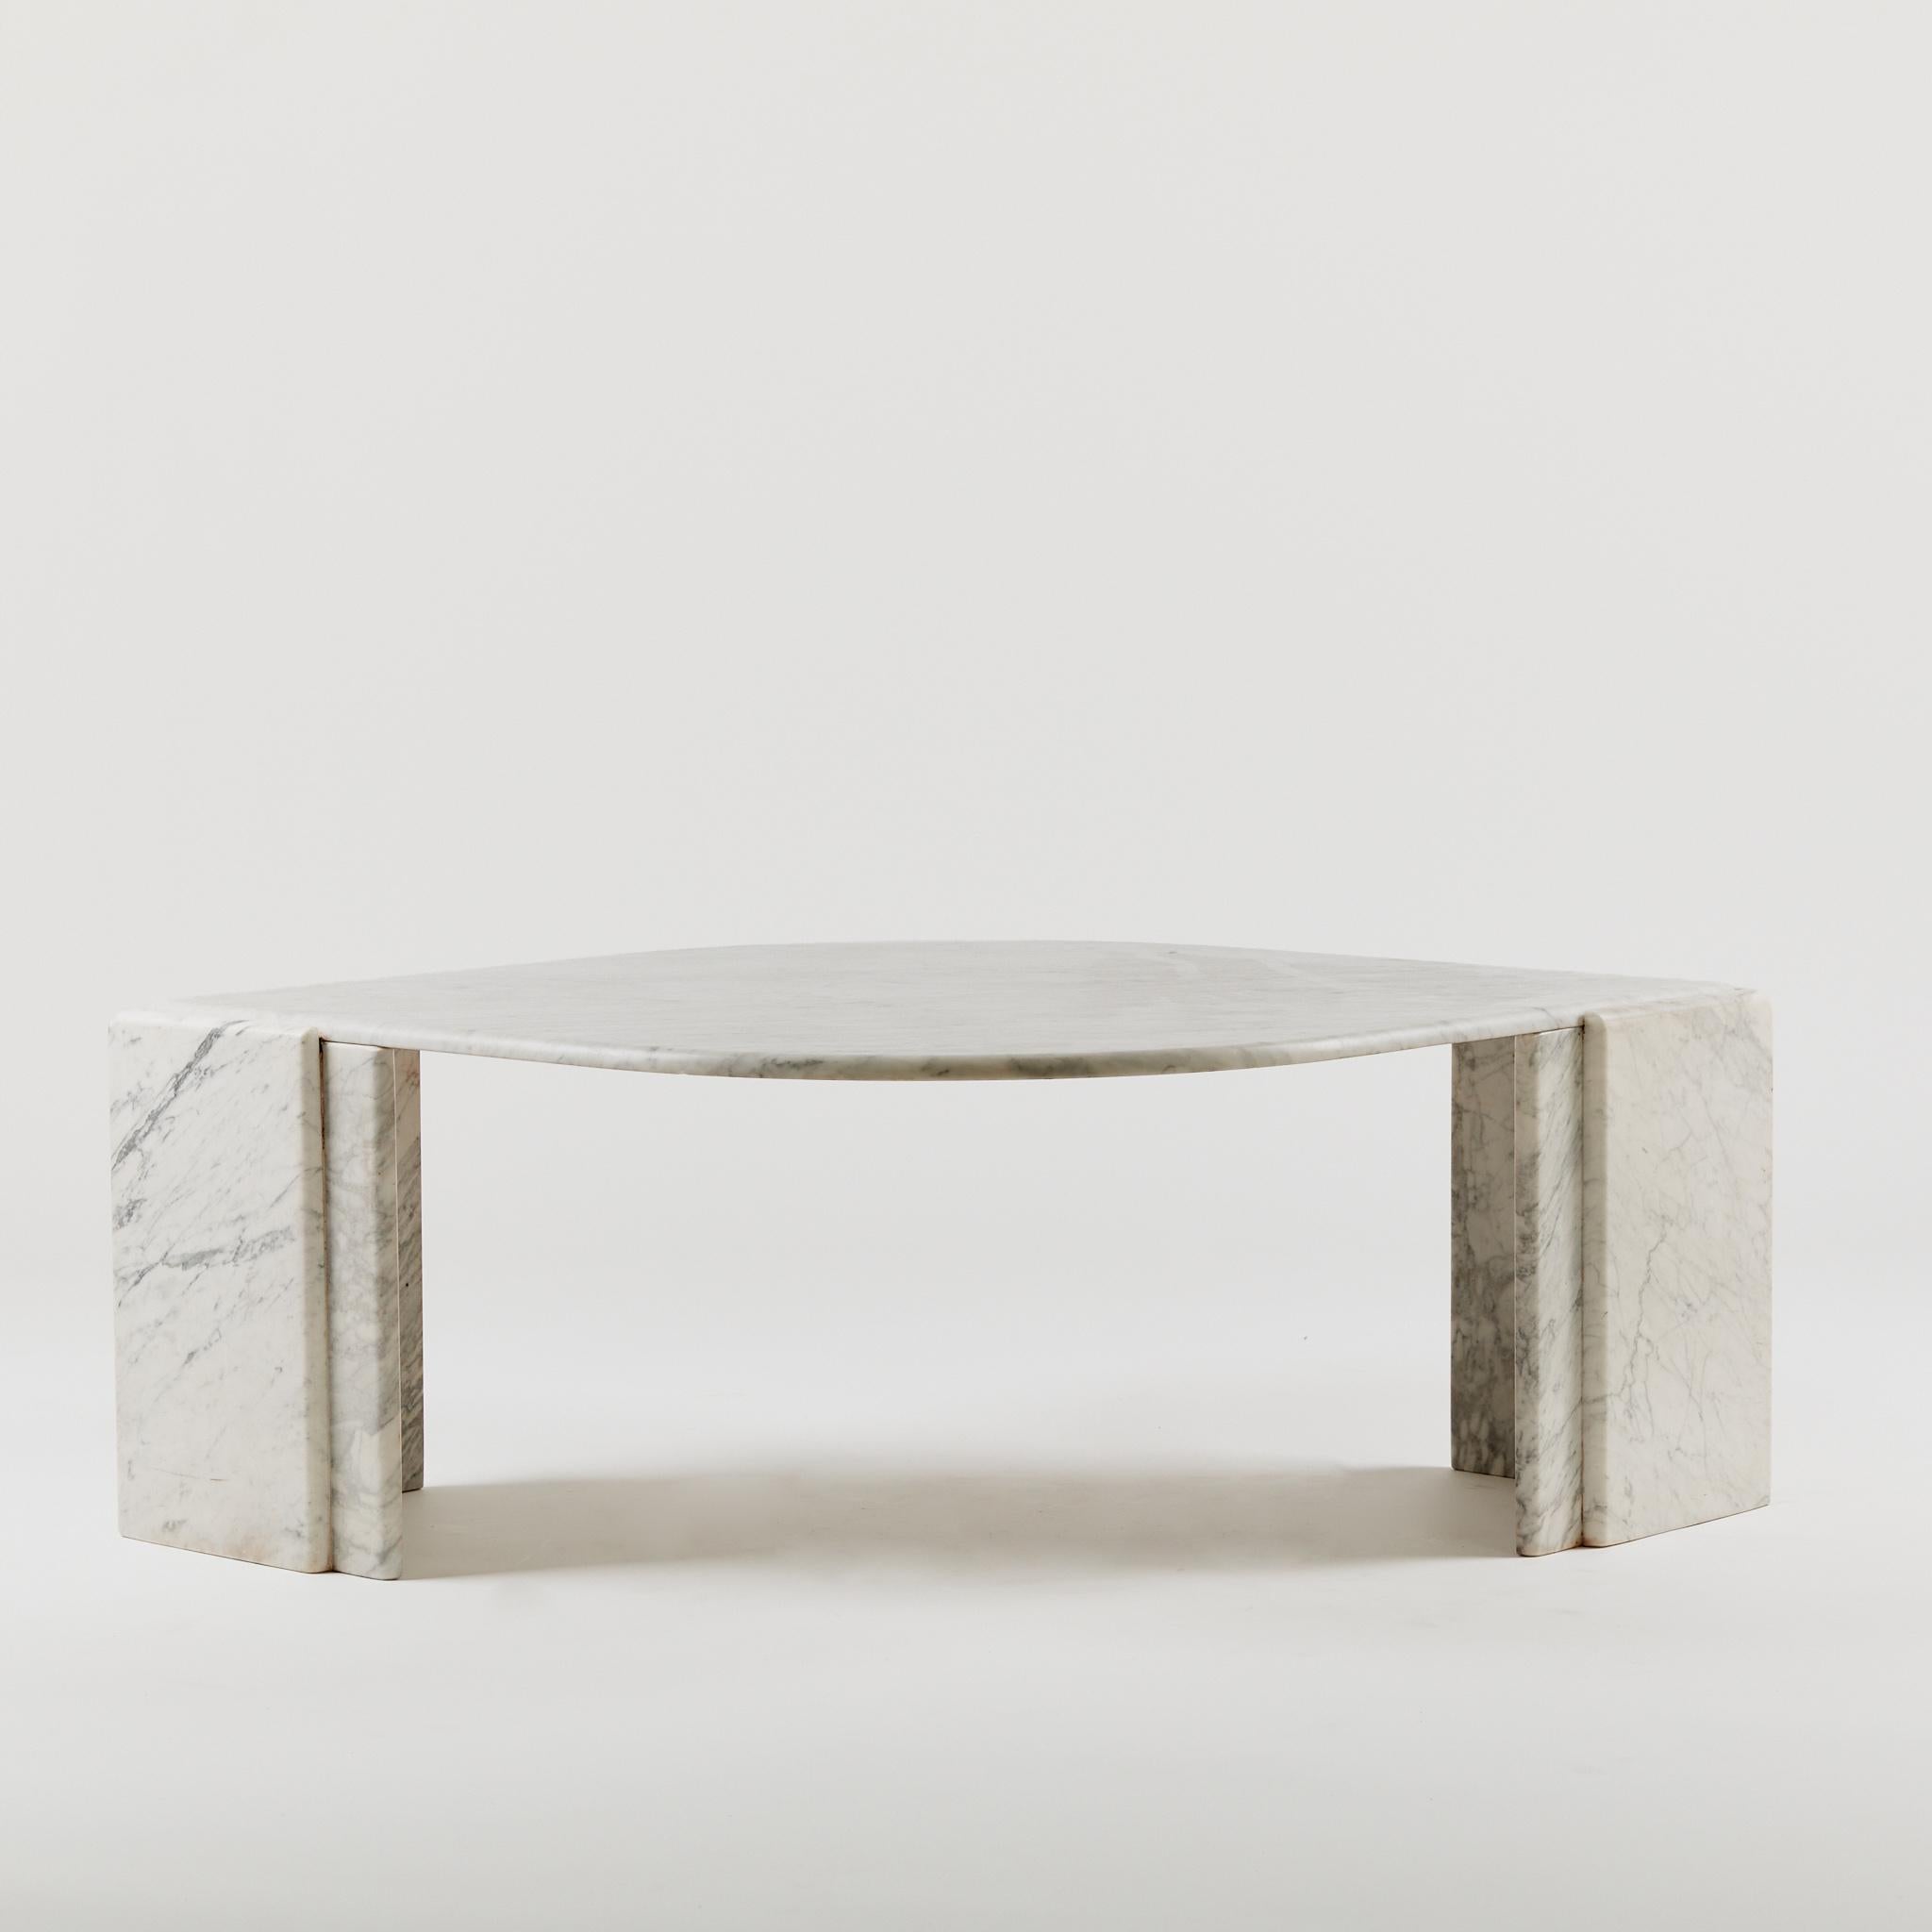 Vintage Carrara marble eye shaped coffee table, with stepped legs. Surface in good vintage condition, no chips or cracks. 

Period: Circa 1980's

Material: Carrara marble 

Dimensions: W98 × L139 × H45 cm

Condition: Vintage condition, with